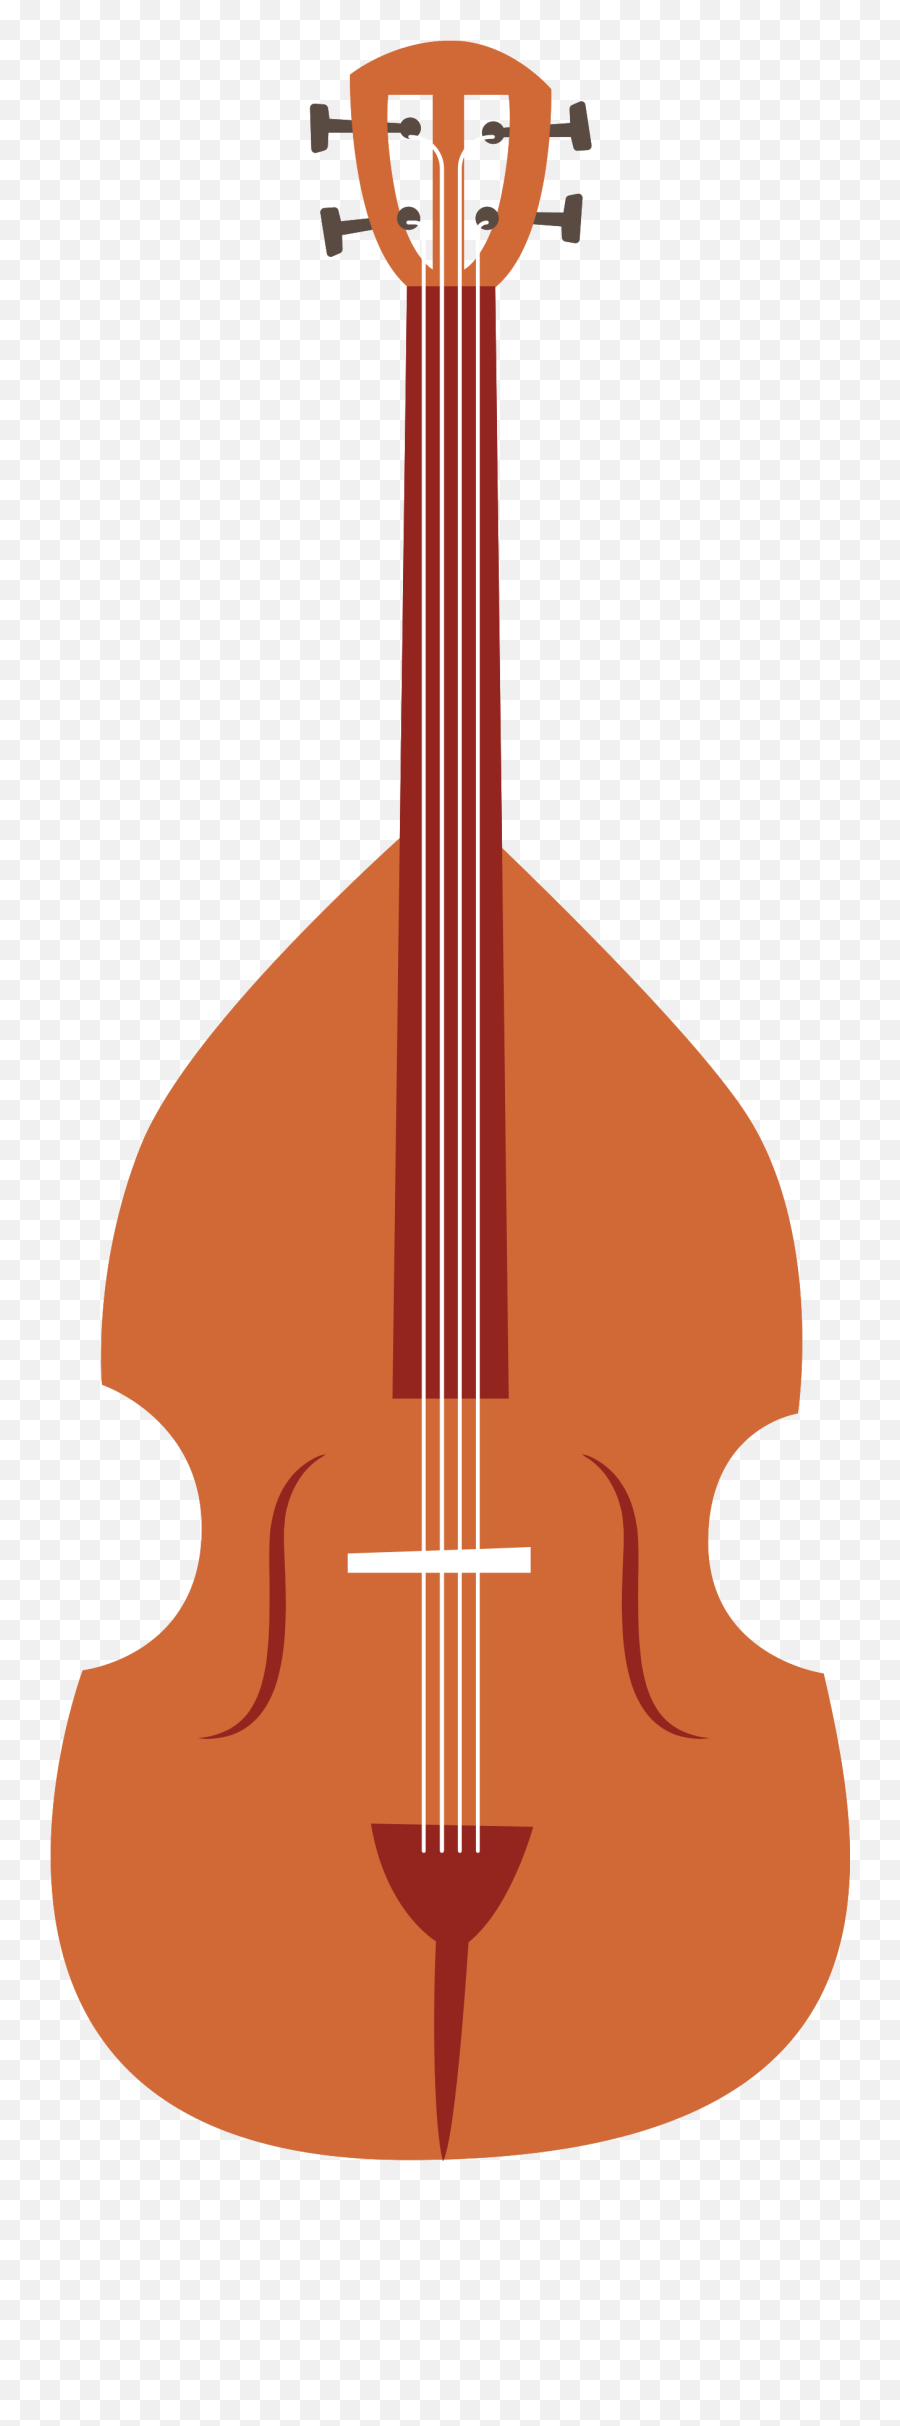 Cello String Instrument Band Orchestra Music Player Song Emoji,Laser Clipart